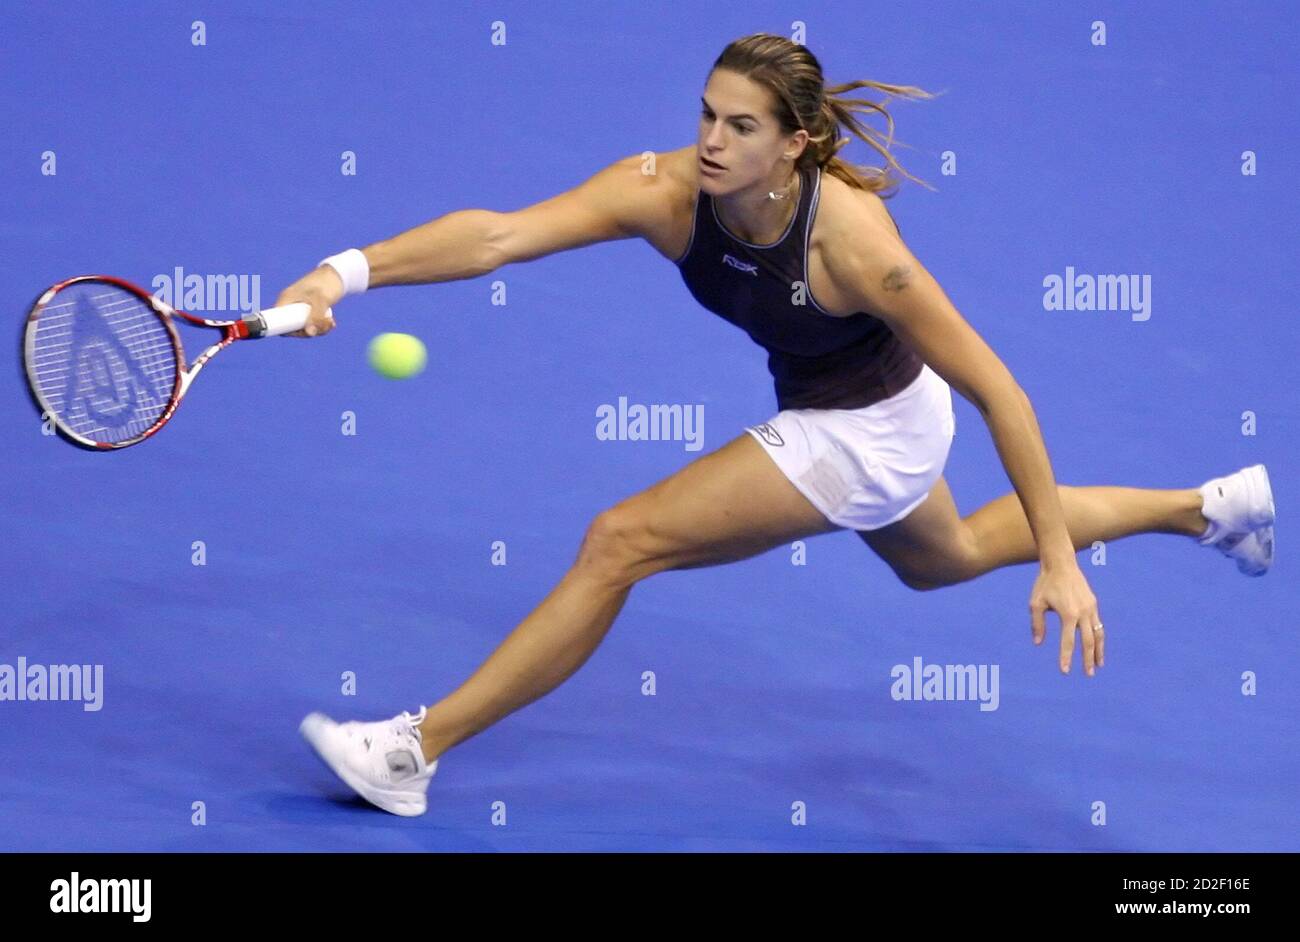 Amelie Mauresmo of France hits a forehand to compatriot Mary Pierce during  the final of the WTA Tour Championships in Los Angeles November 13, 2005.  Mauresmo won 5-7 7-6 6-4. REUTERS/Lucy Nicholson Stock Photo - Alamy